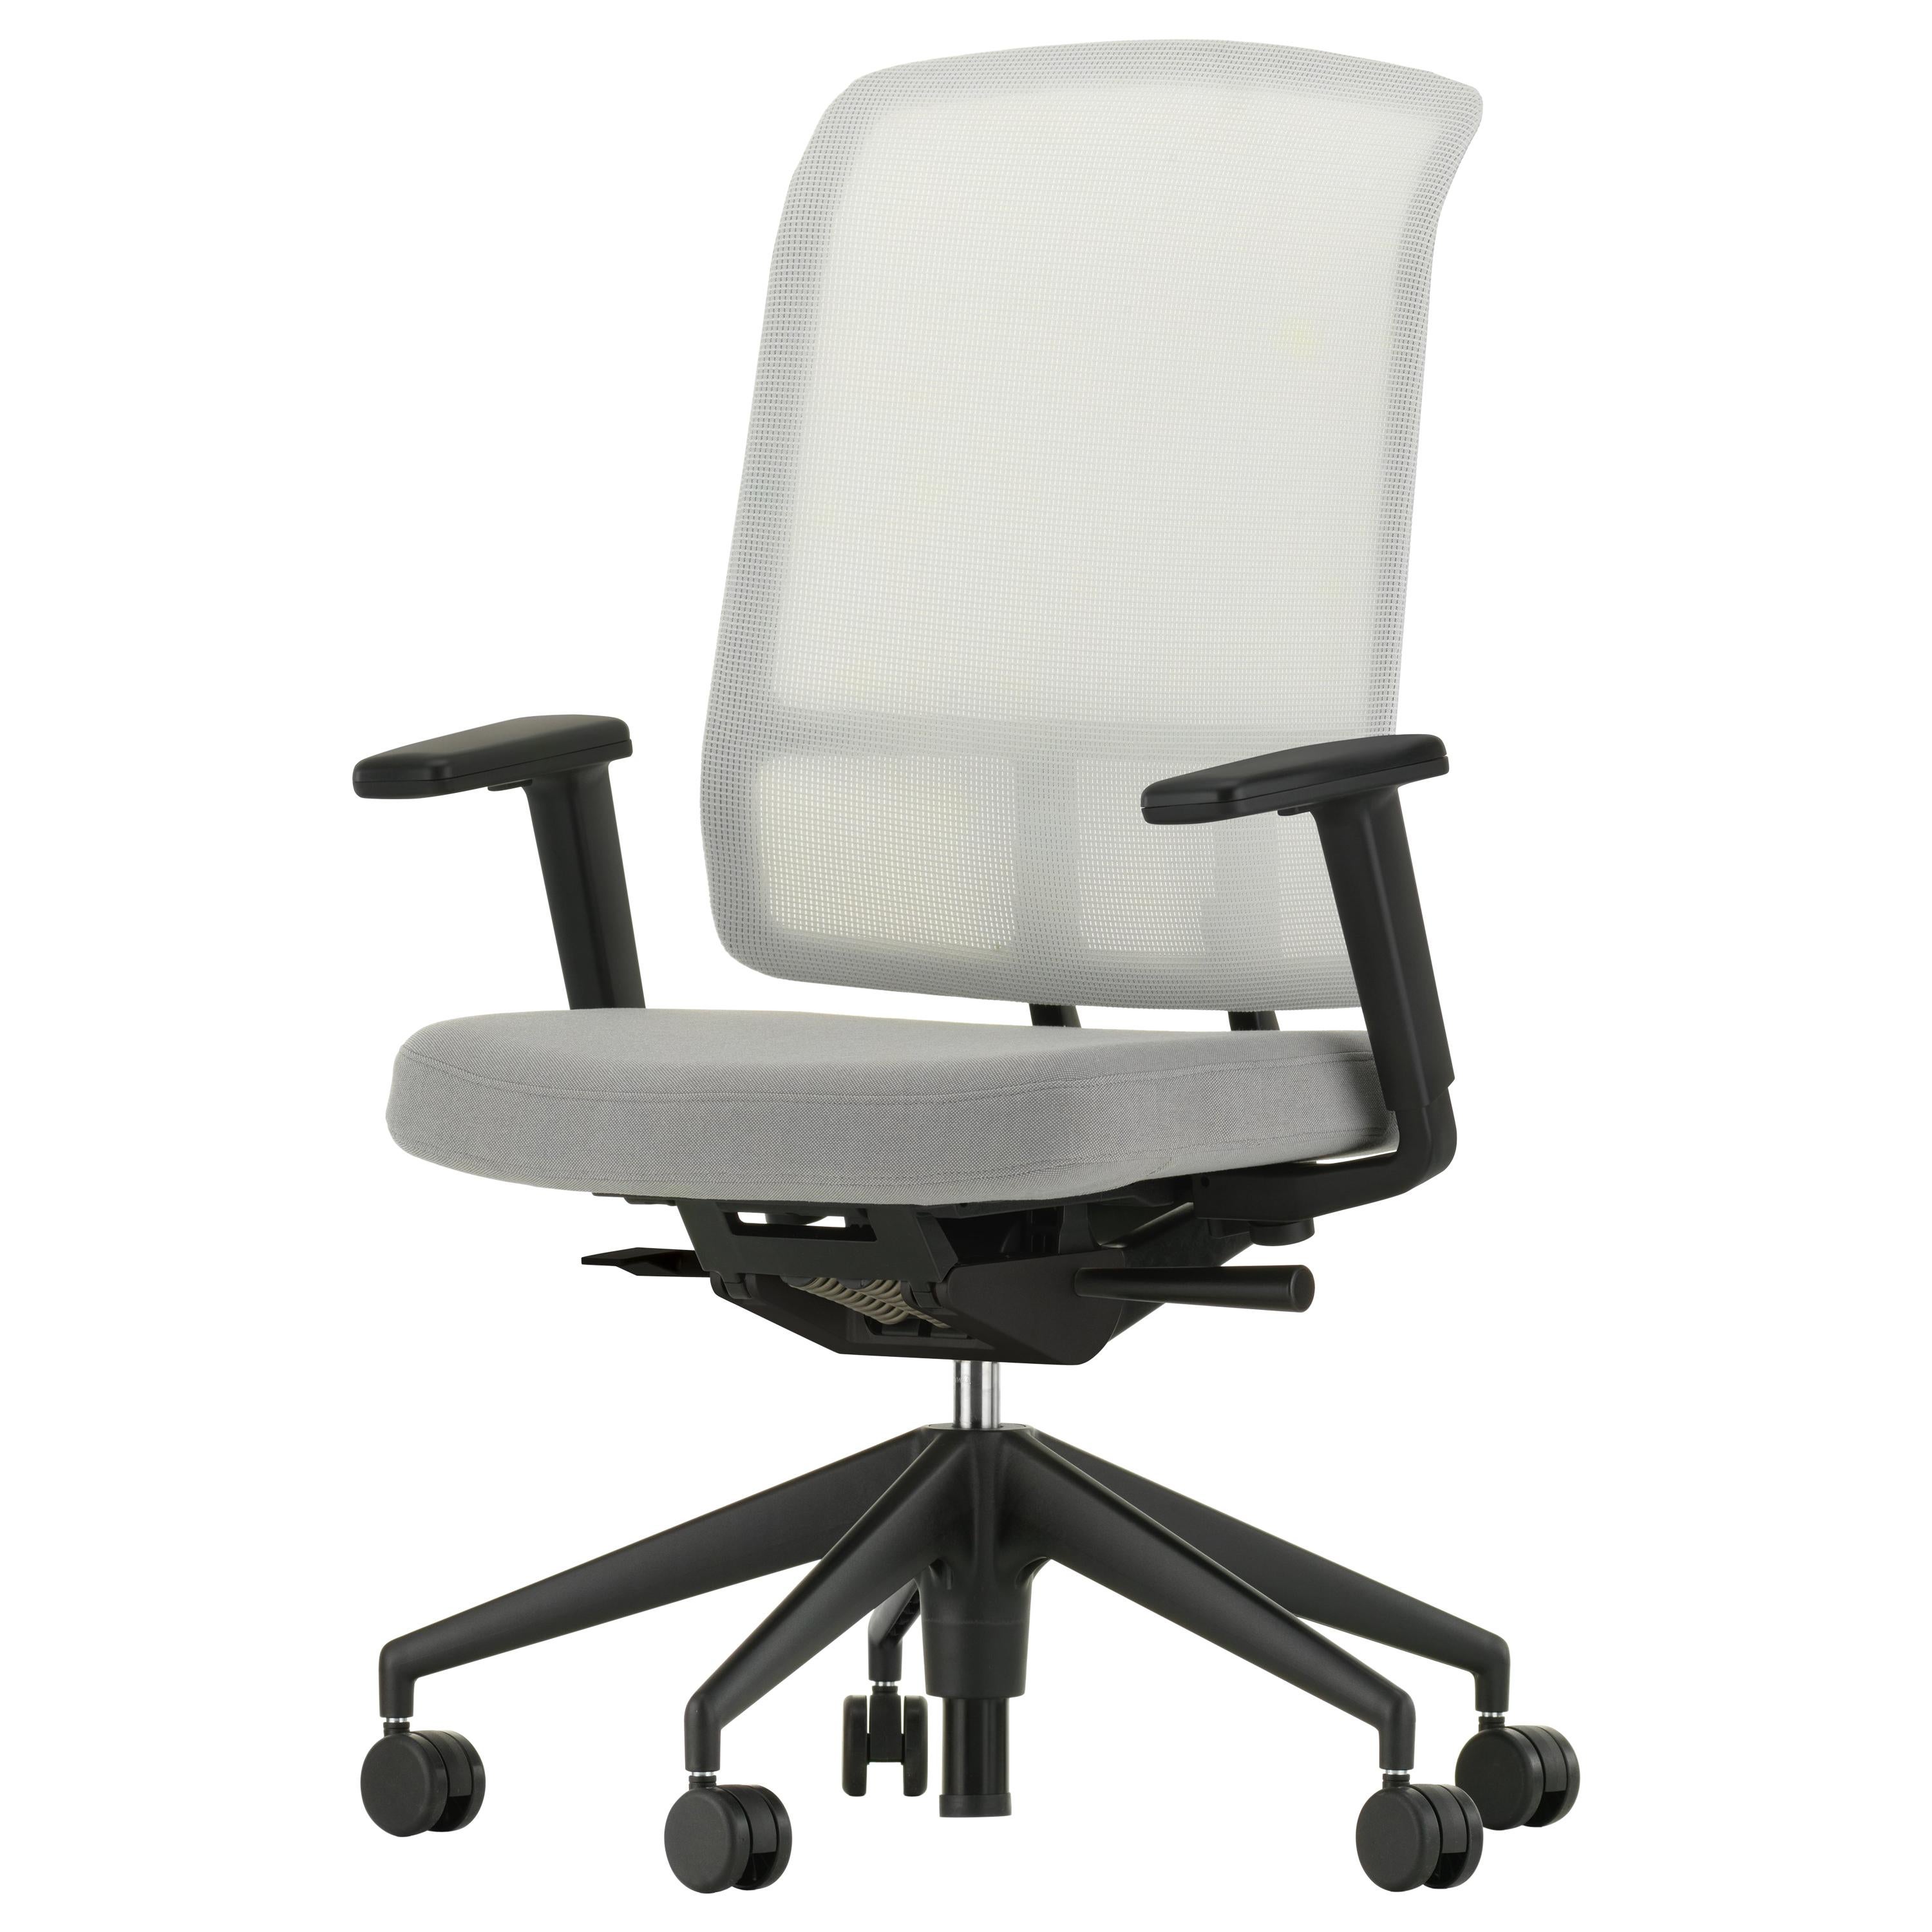 Vitra AM Chair in White and Cream by Alberto Meda im Angebot